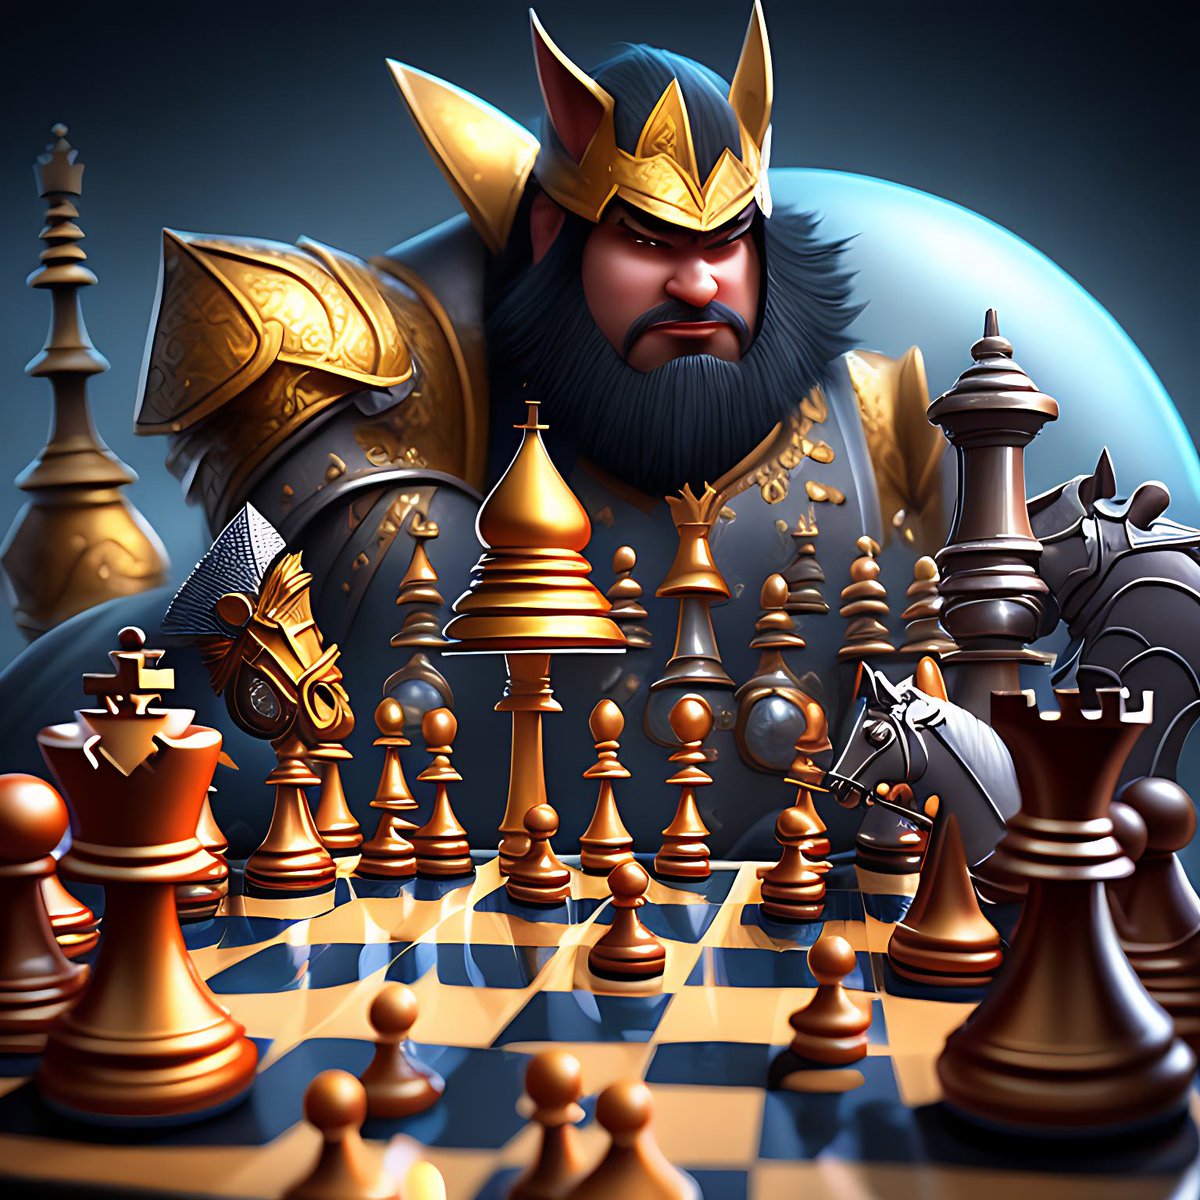 chess solider 
by h0l0m

opensea.io/collection/dig…

🍢🍛🍟🍕🍟🍔👌🏾😅😃😊

#h0l0m #opensea #digitalcollectible #artwork #chess #chesspieces #pawn #soldier #nft #nftartist #collectorsitem #trending #viral #viking #crypto #chessboard #grandmaster #billionaire #nftdragonking